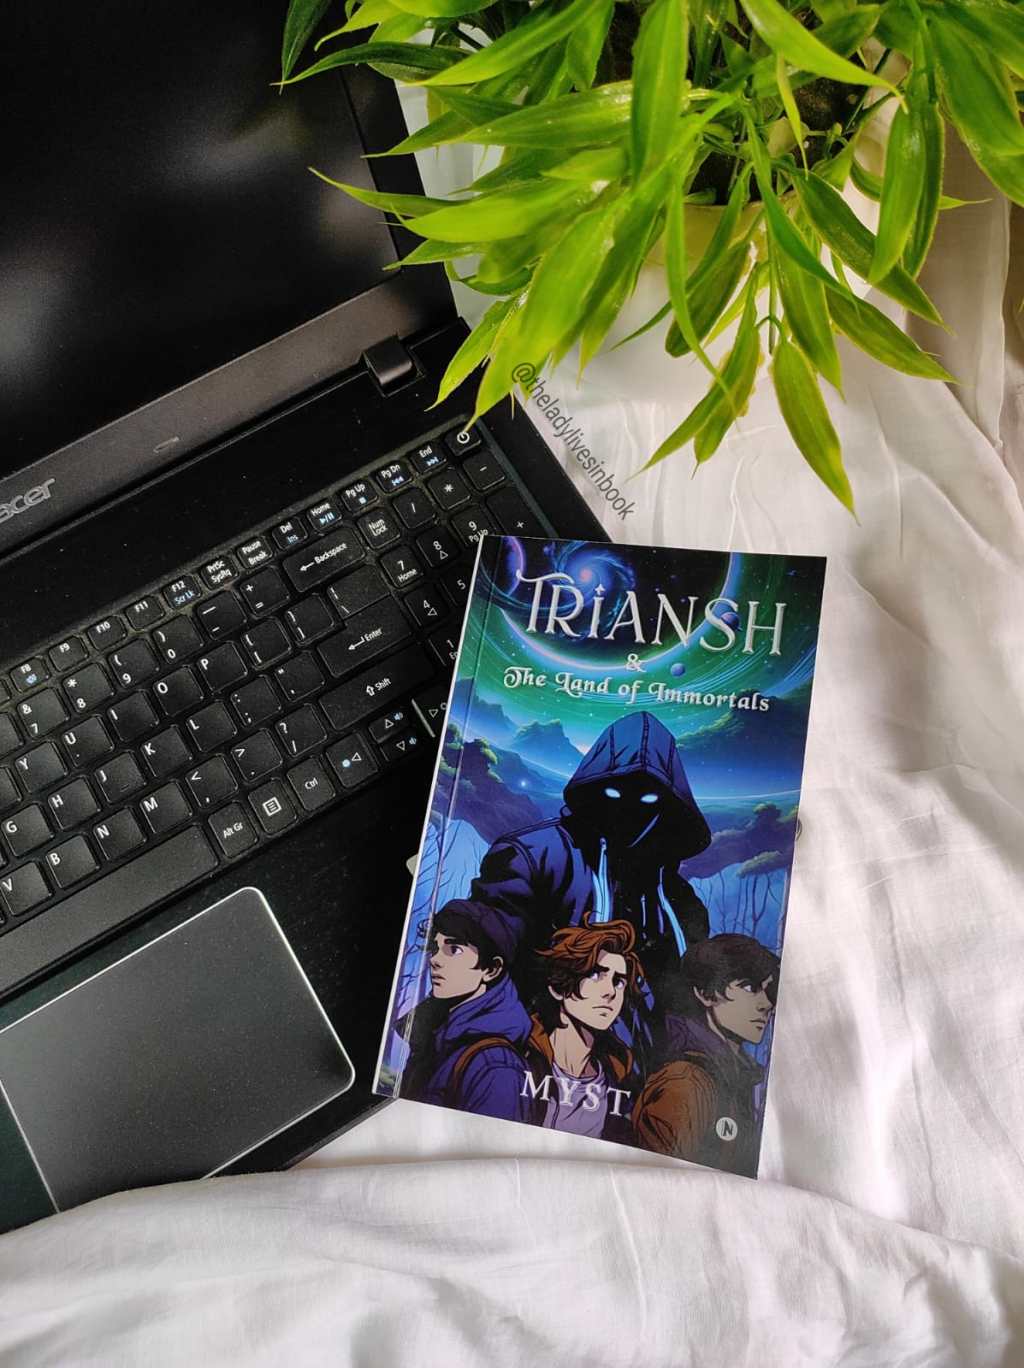 A simple trekking turns to a gripping Sci-Fi adventure: Triansh by Myst – Book Review